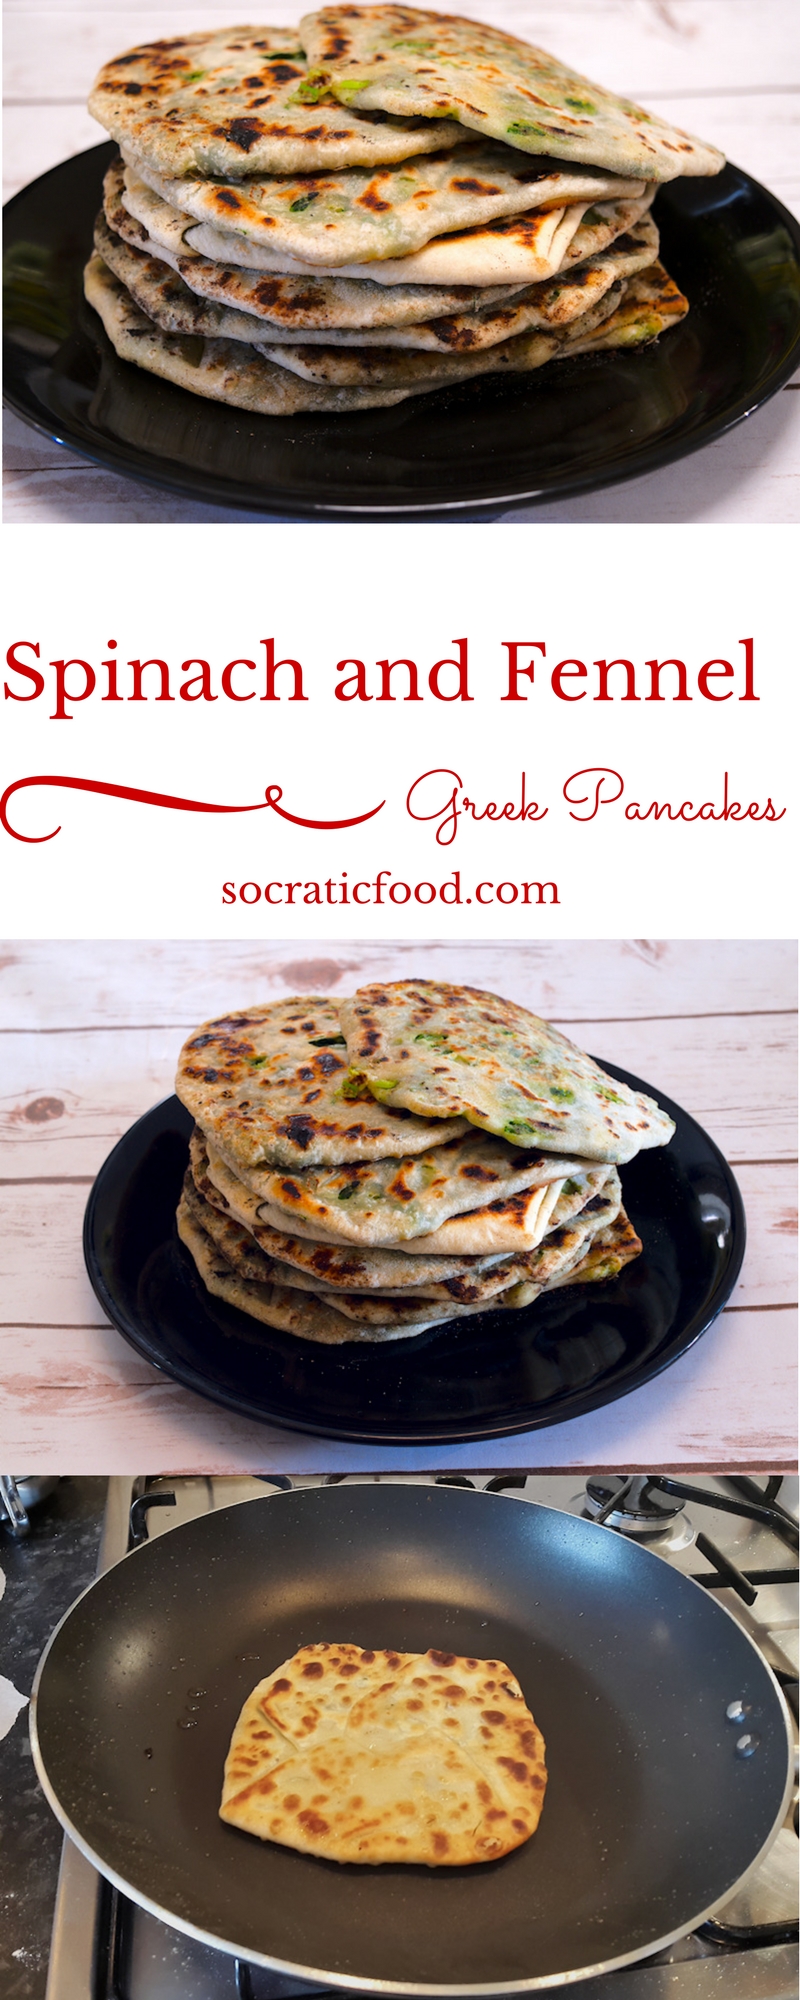 Spinach and Fennel Greek Pancakes